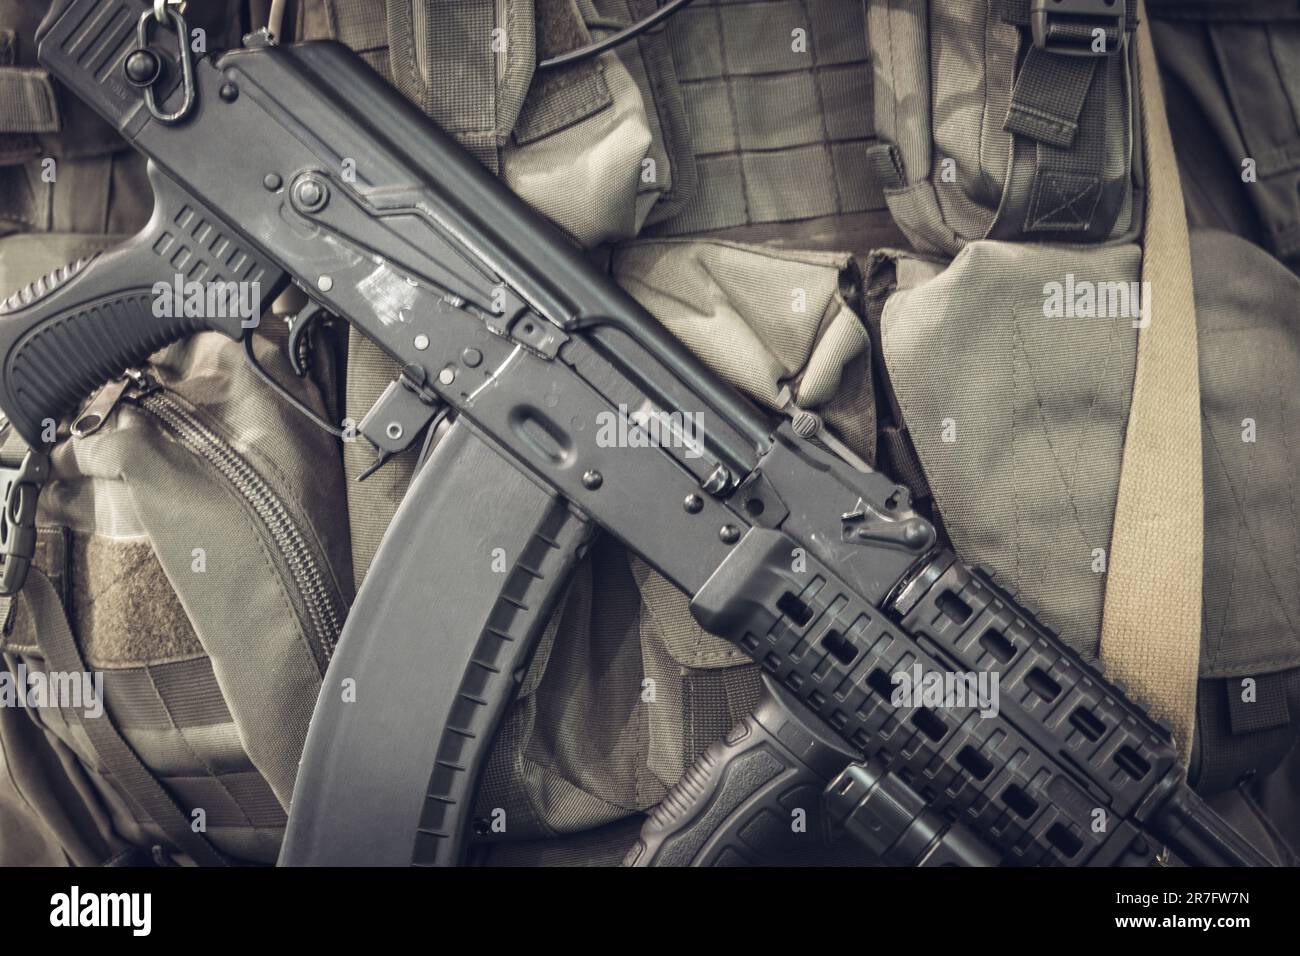 Military equipment of a soldier, machine gun on the background of body armor Stock Photo